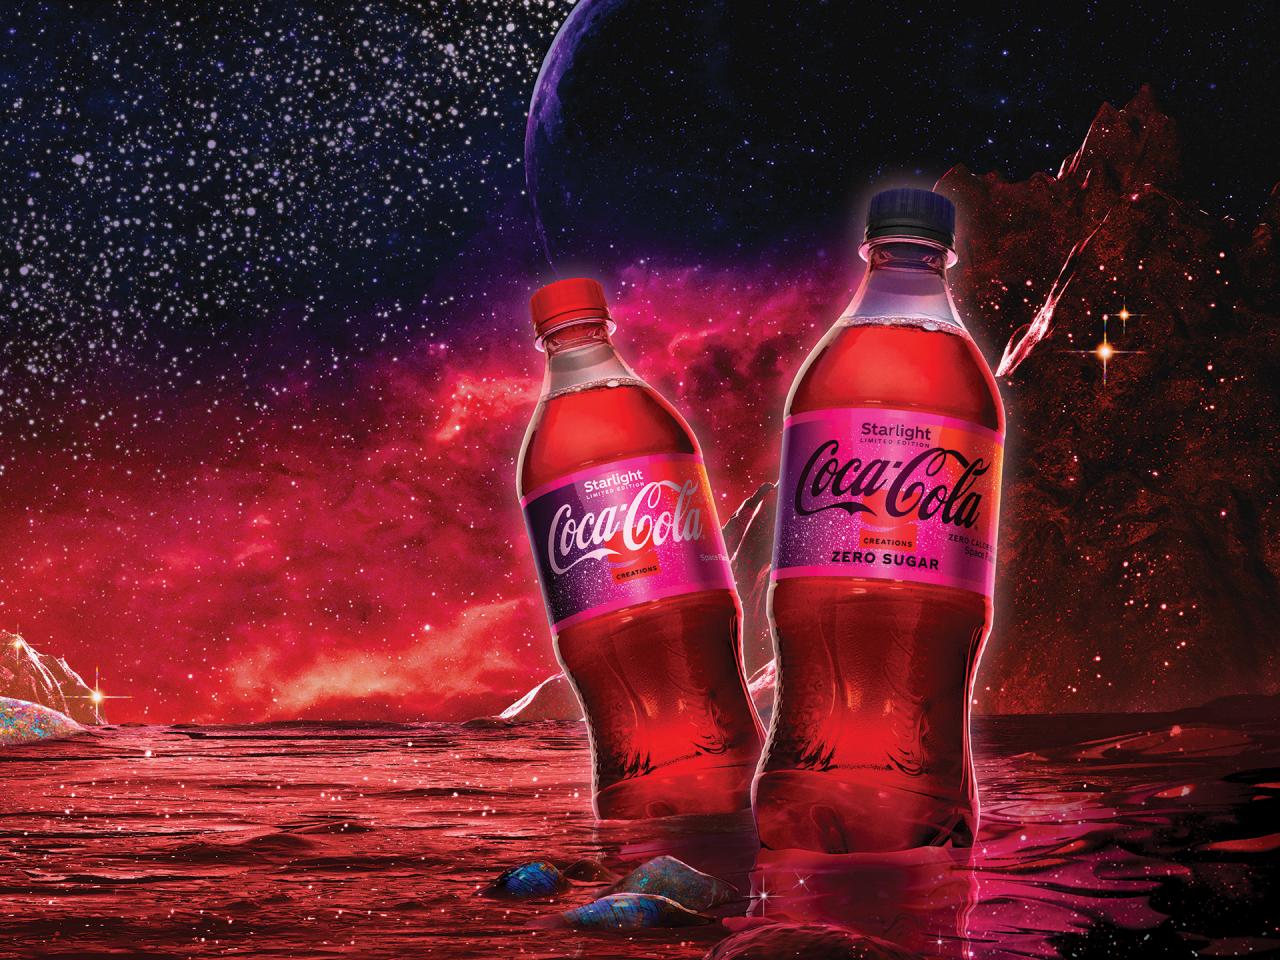 Coca-Cola's Newest Flavor 'Ultimate' Tastes Like Leveling Up, FN Dish -  Behind-the-Scenes, Food Trends, and Best Recipes : Food Network